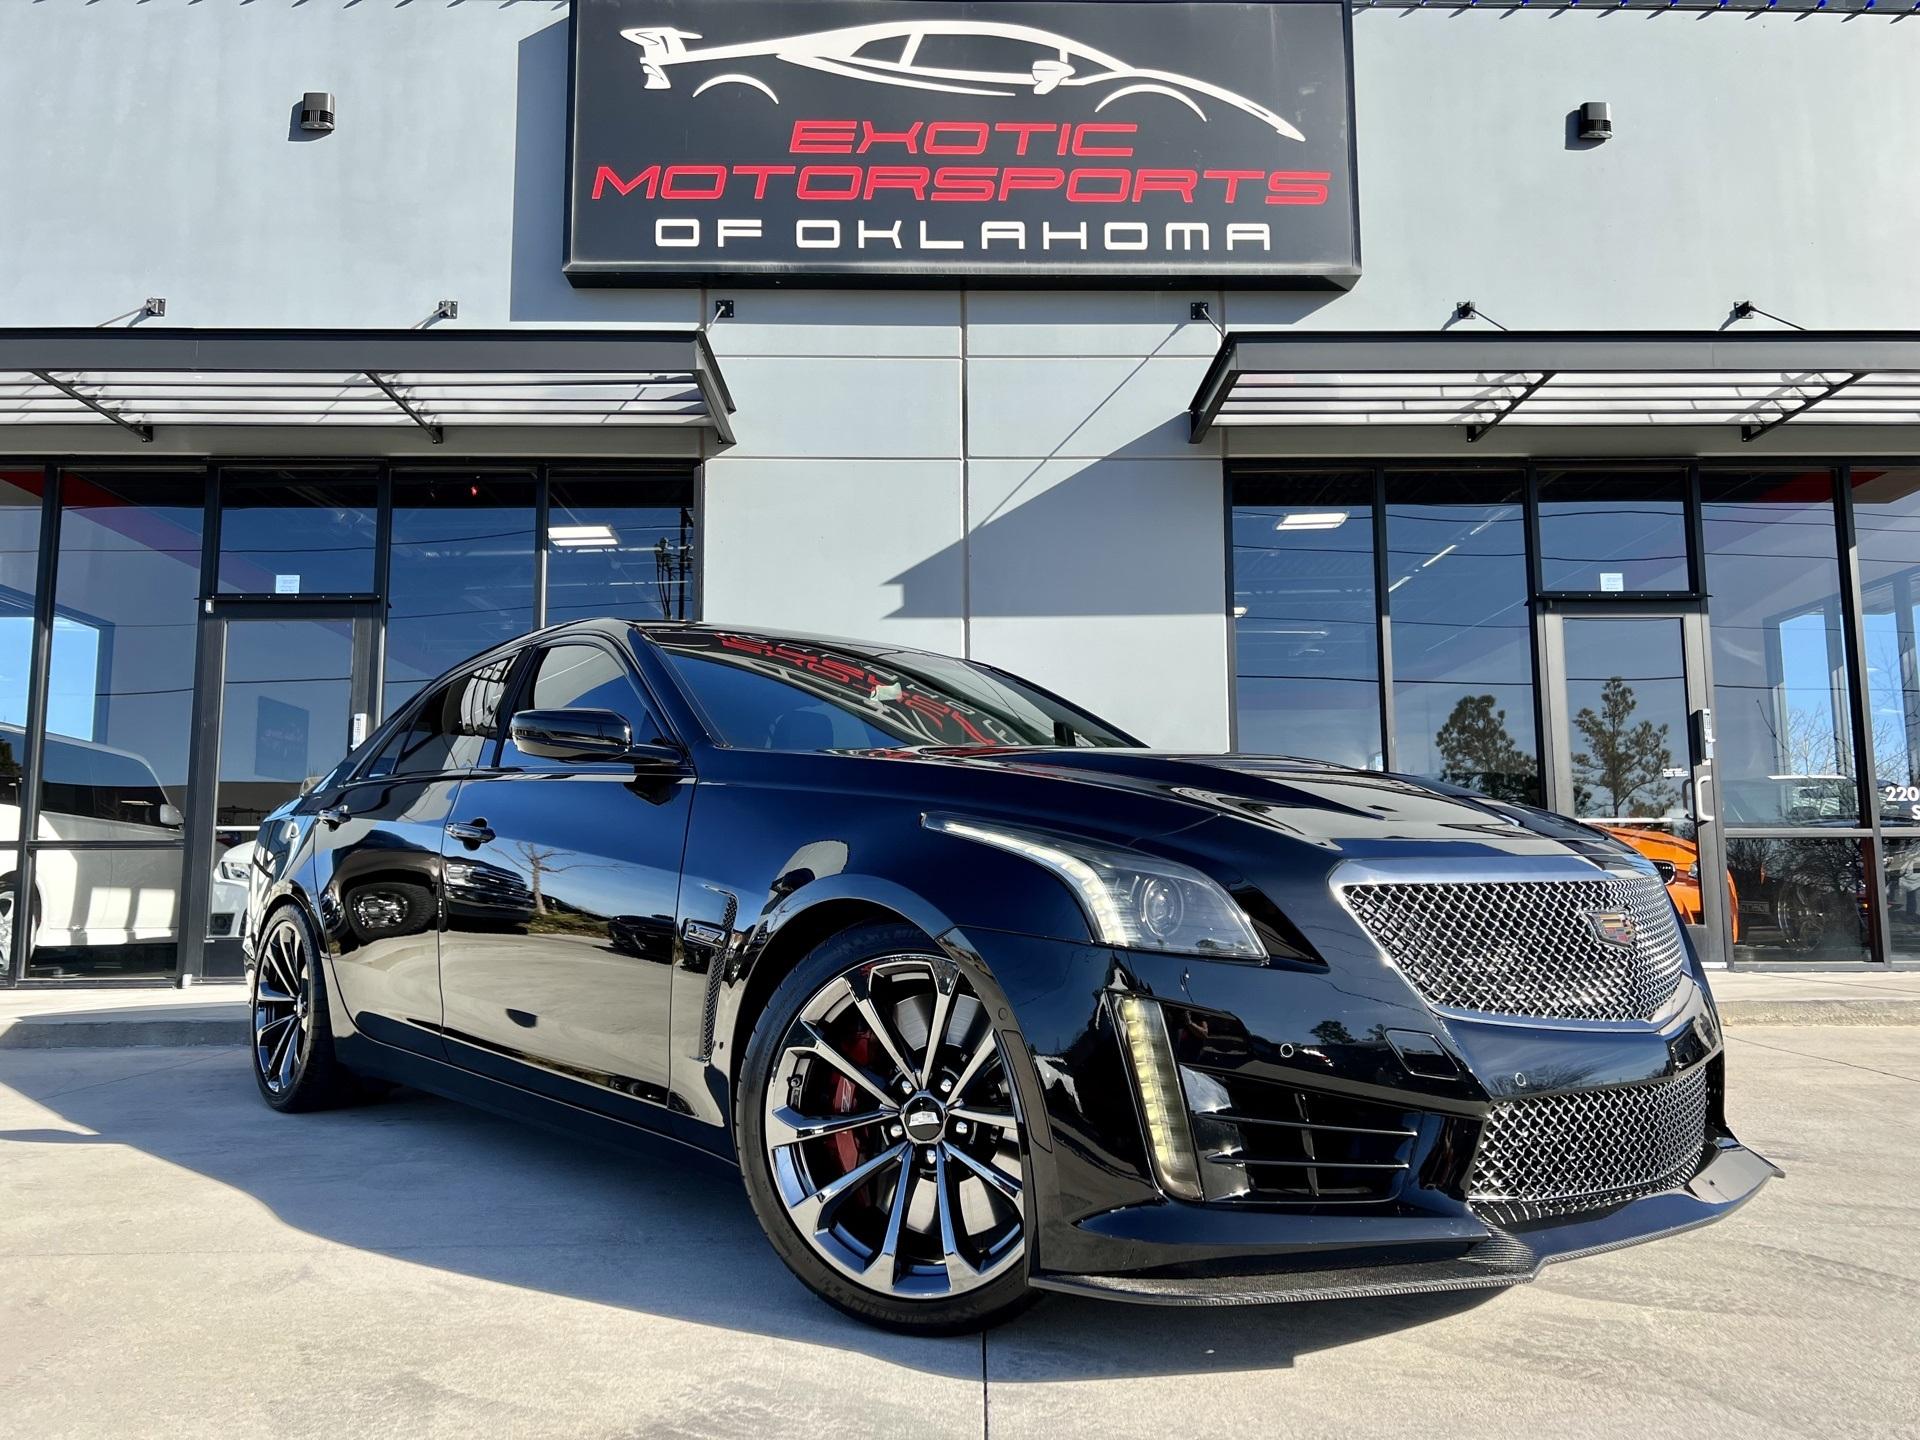 Used 2018 Cadillac Cts V Championship Edition For Sale Sold Exotic Motorsports Of Oklahoma Stock C604